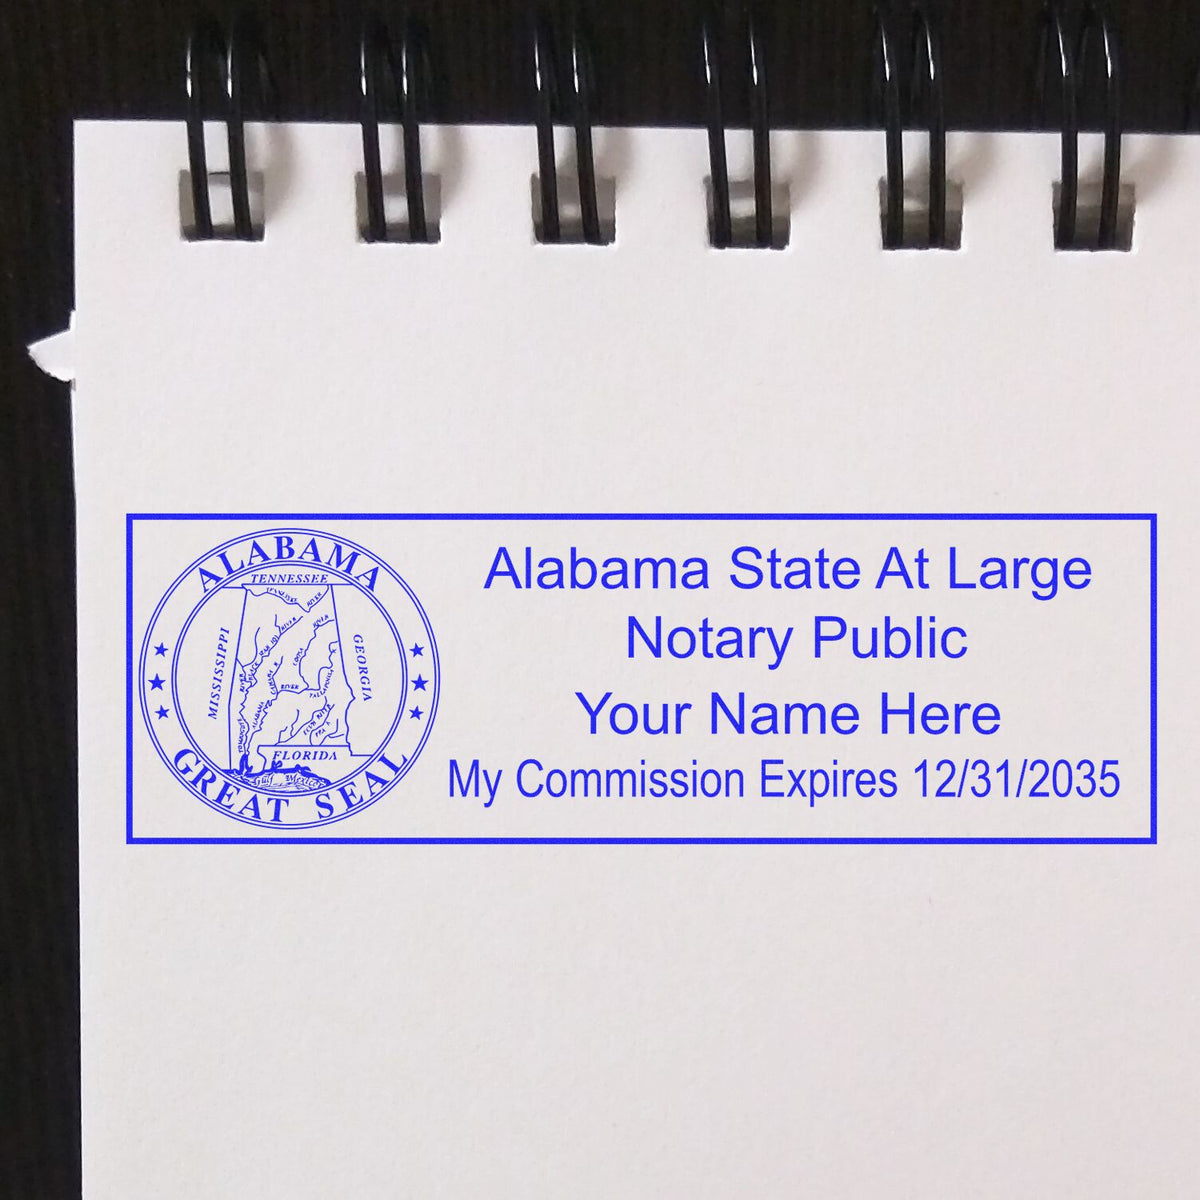 An alternative view of the Super Slim Alabama Notary Public Stamp stamped on a sheet of paper showing the image in use